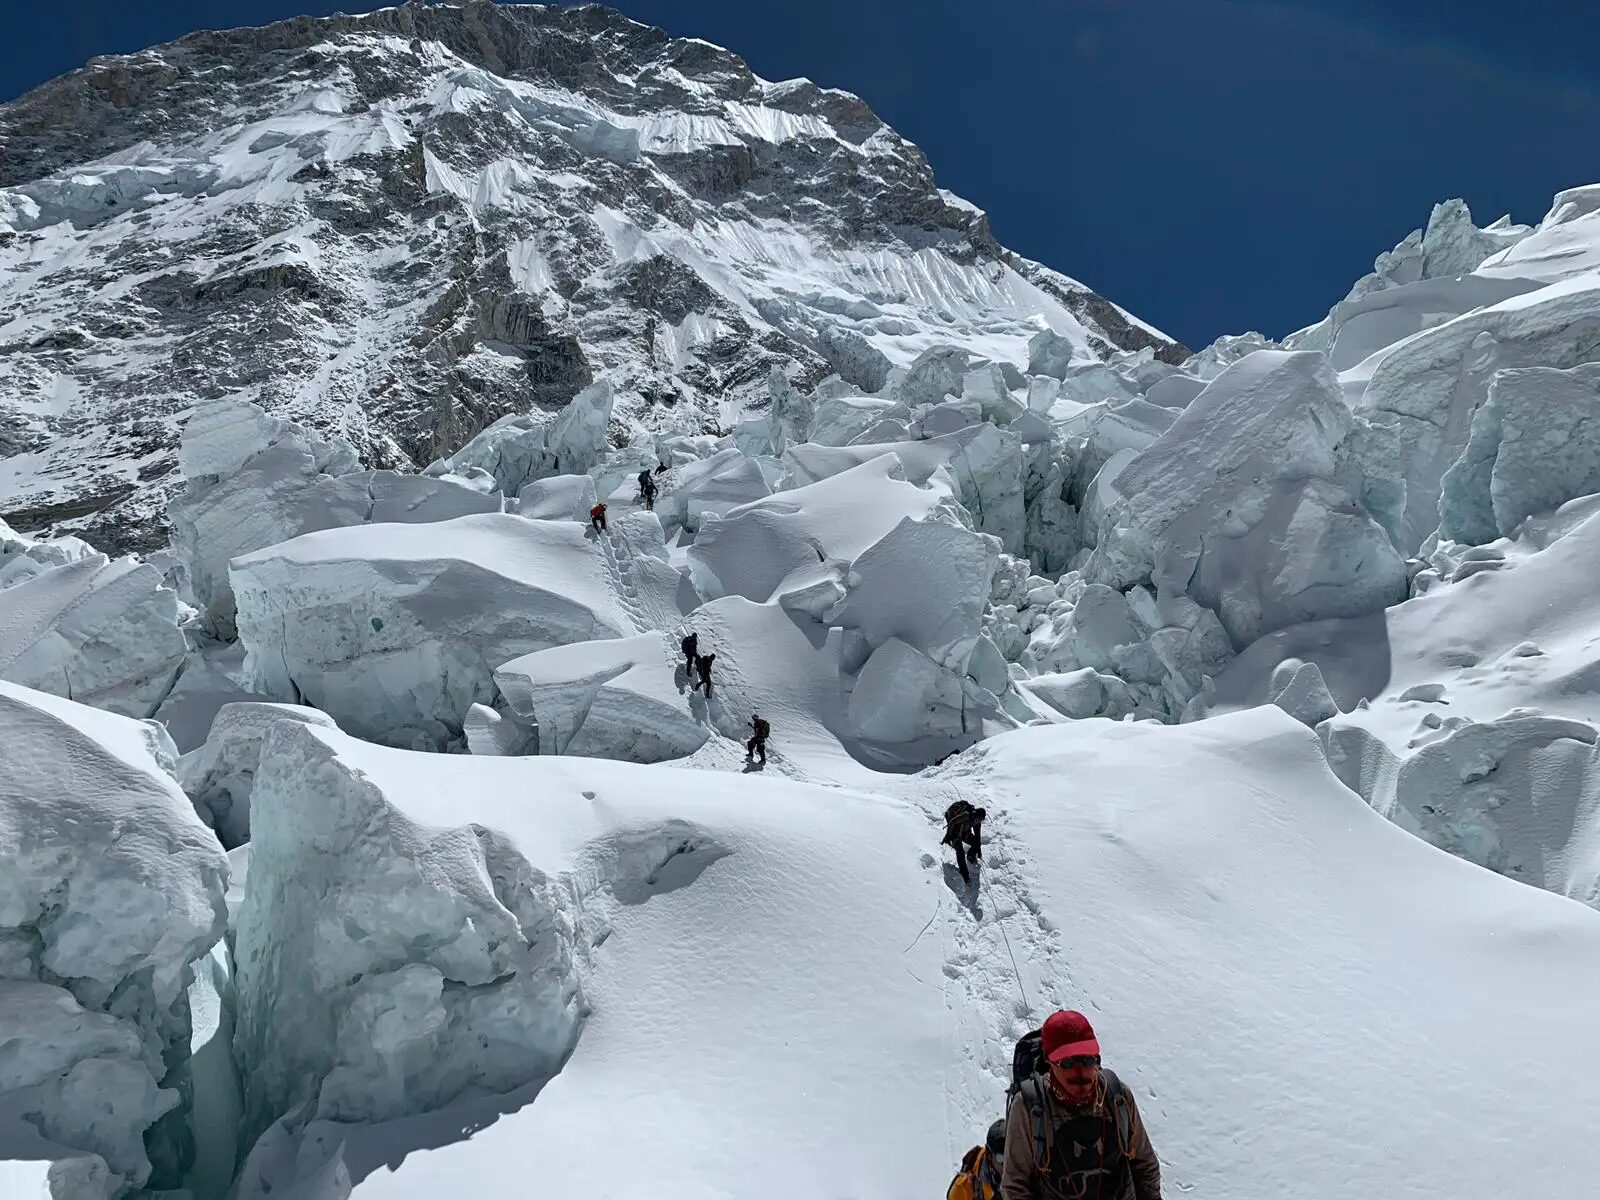 Climbers ascend the Khumbu Icefall on Mount Everest.